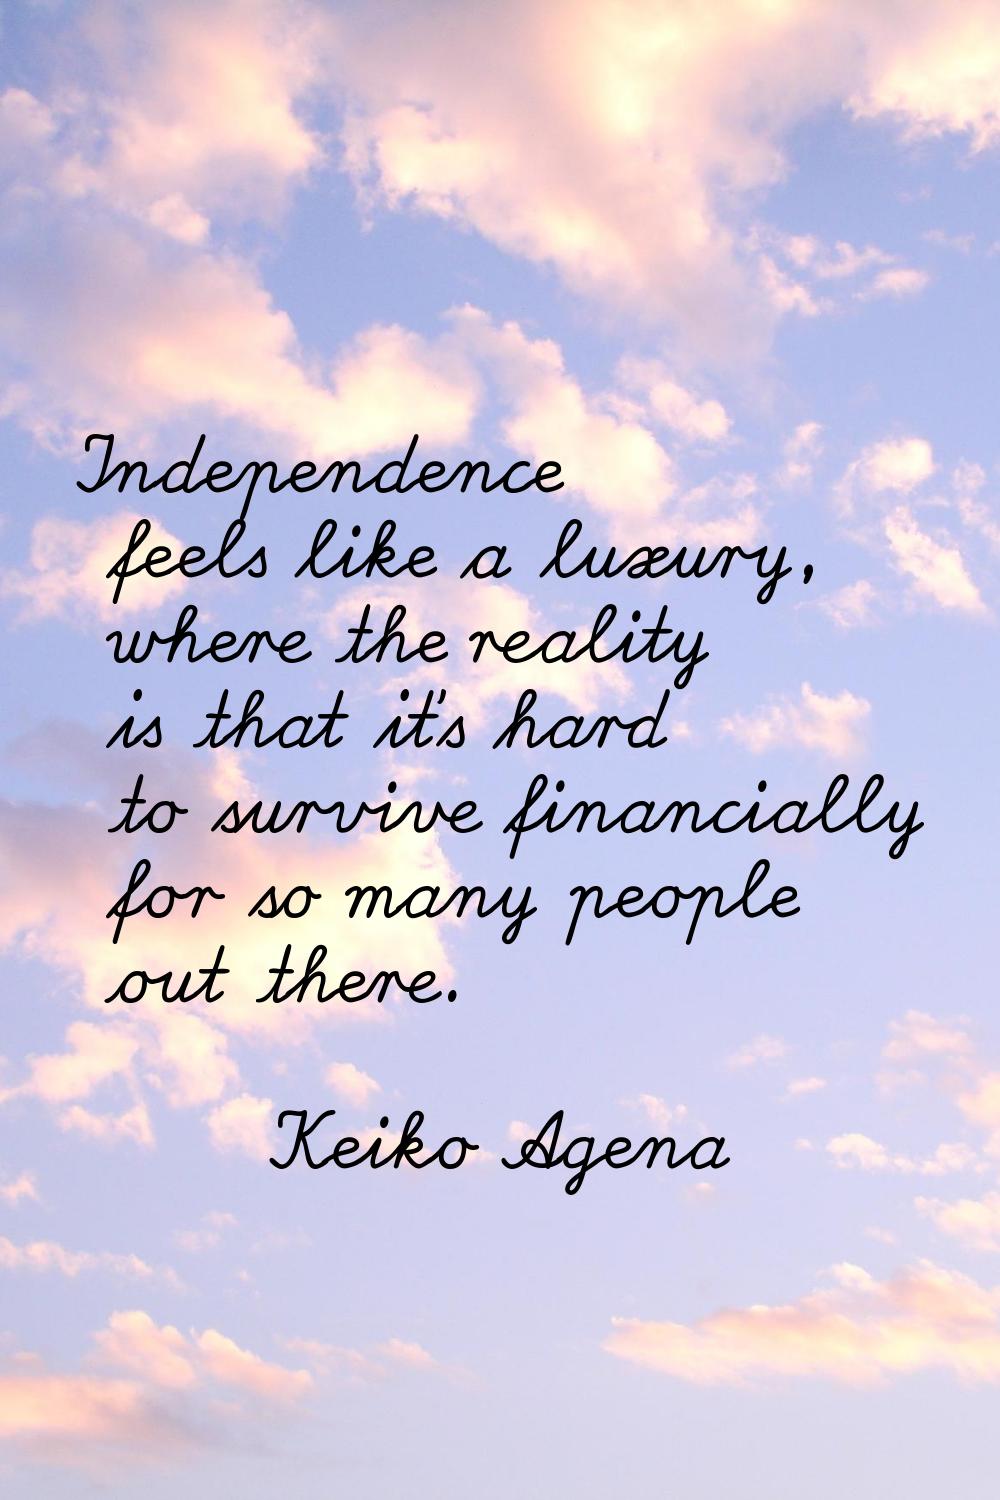 Independence feels like a luxury, where the reality is that it's hard to survive financially for so